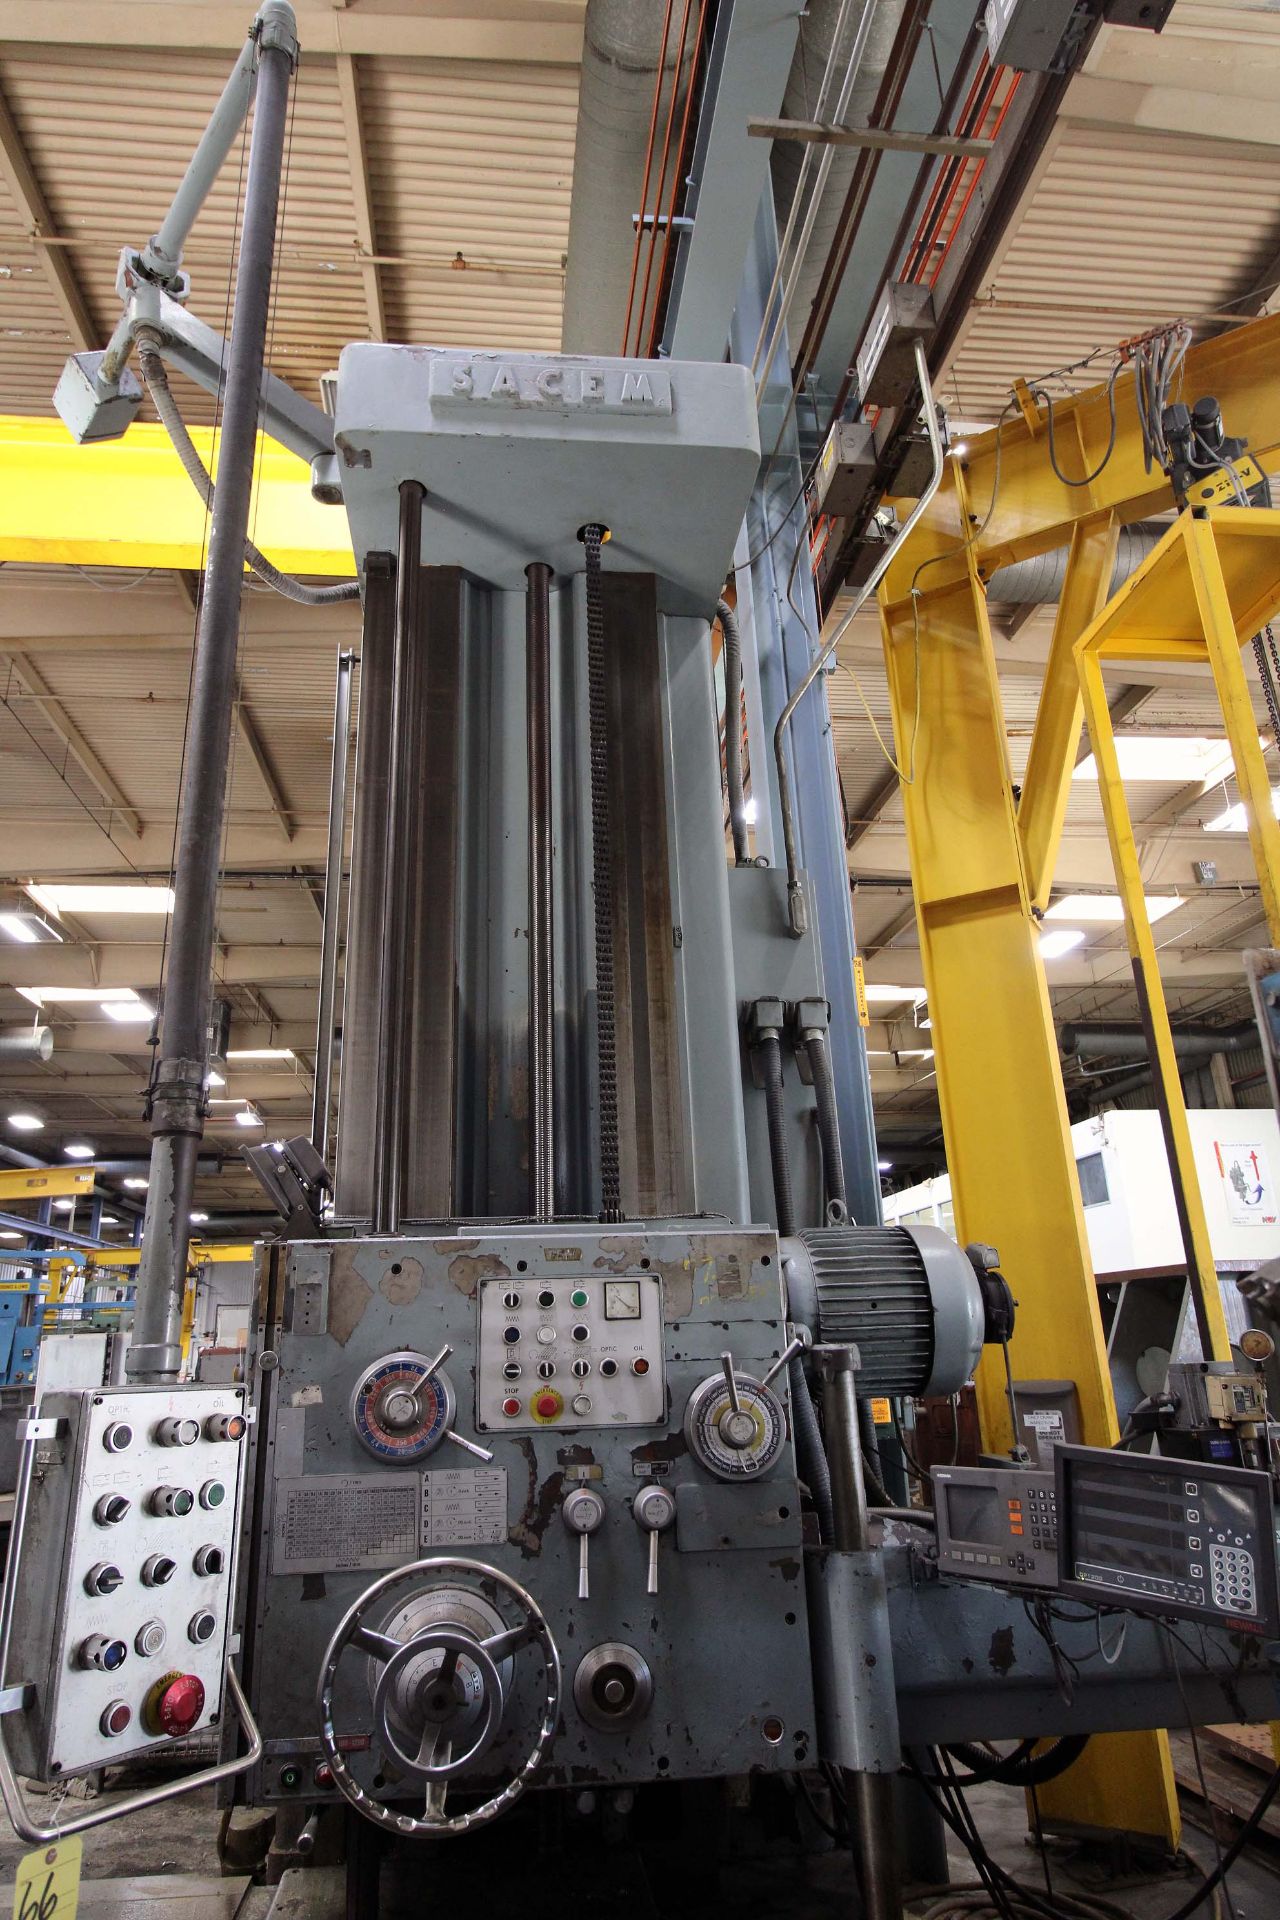 TABLE TYPE HORIZONTAL BORING MILL, SACEM HERCULES MDL. MST130, new 1980, 55” x 63-3/4” built-in - Image 5 of 10